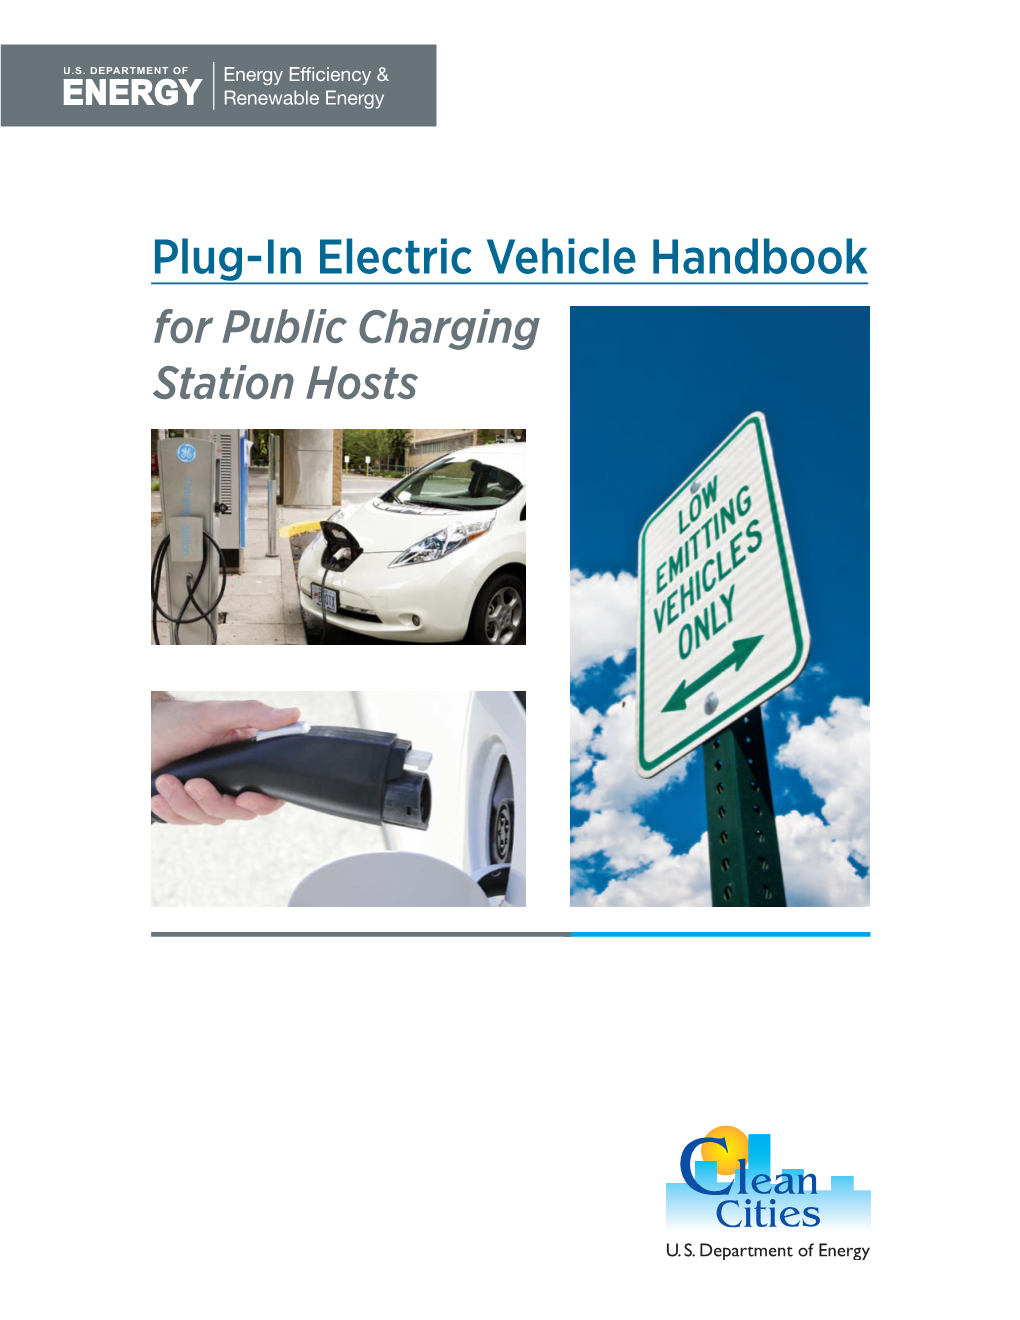 Plug-In Electric Vehicle Handbook for Public Charging Station Hosts 2 Plug-In Electric Vehicle Handbook for Public Charging Station Hosts